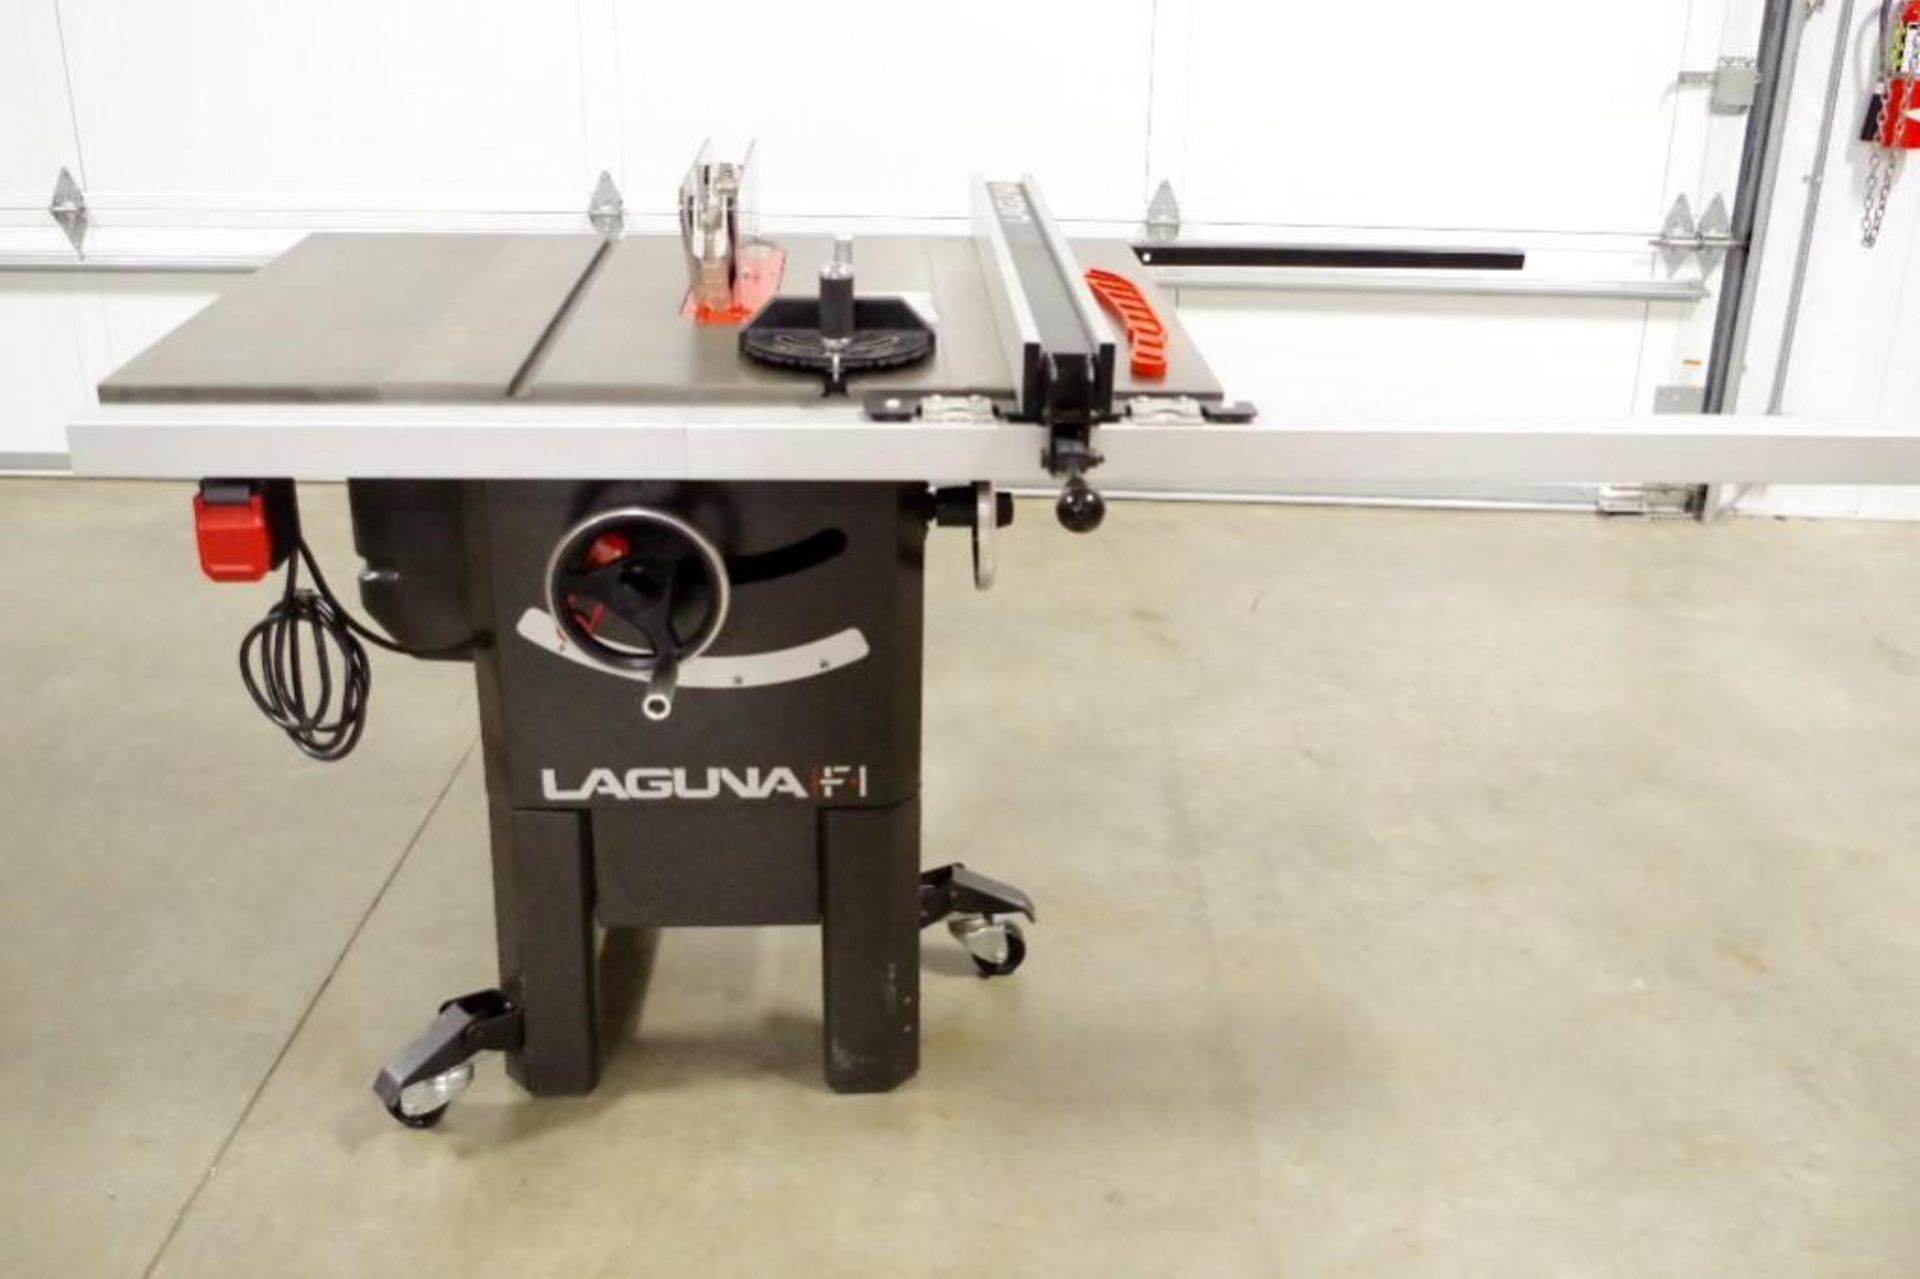 LAGUNA Fusion 10" Table Saw, 36"W Cut, 27" x 40" Cast Iron Table on Casters - Image 3 of 7